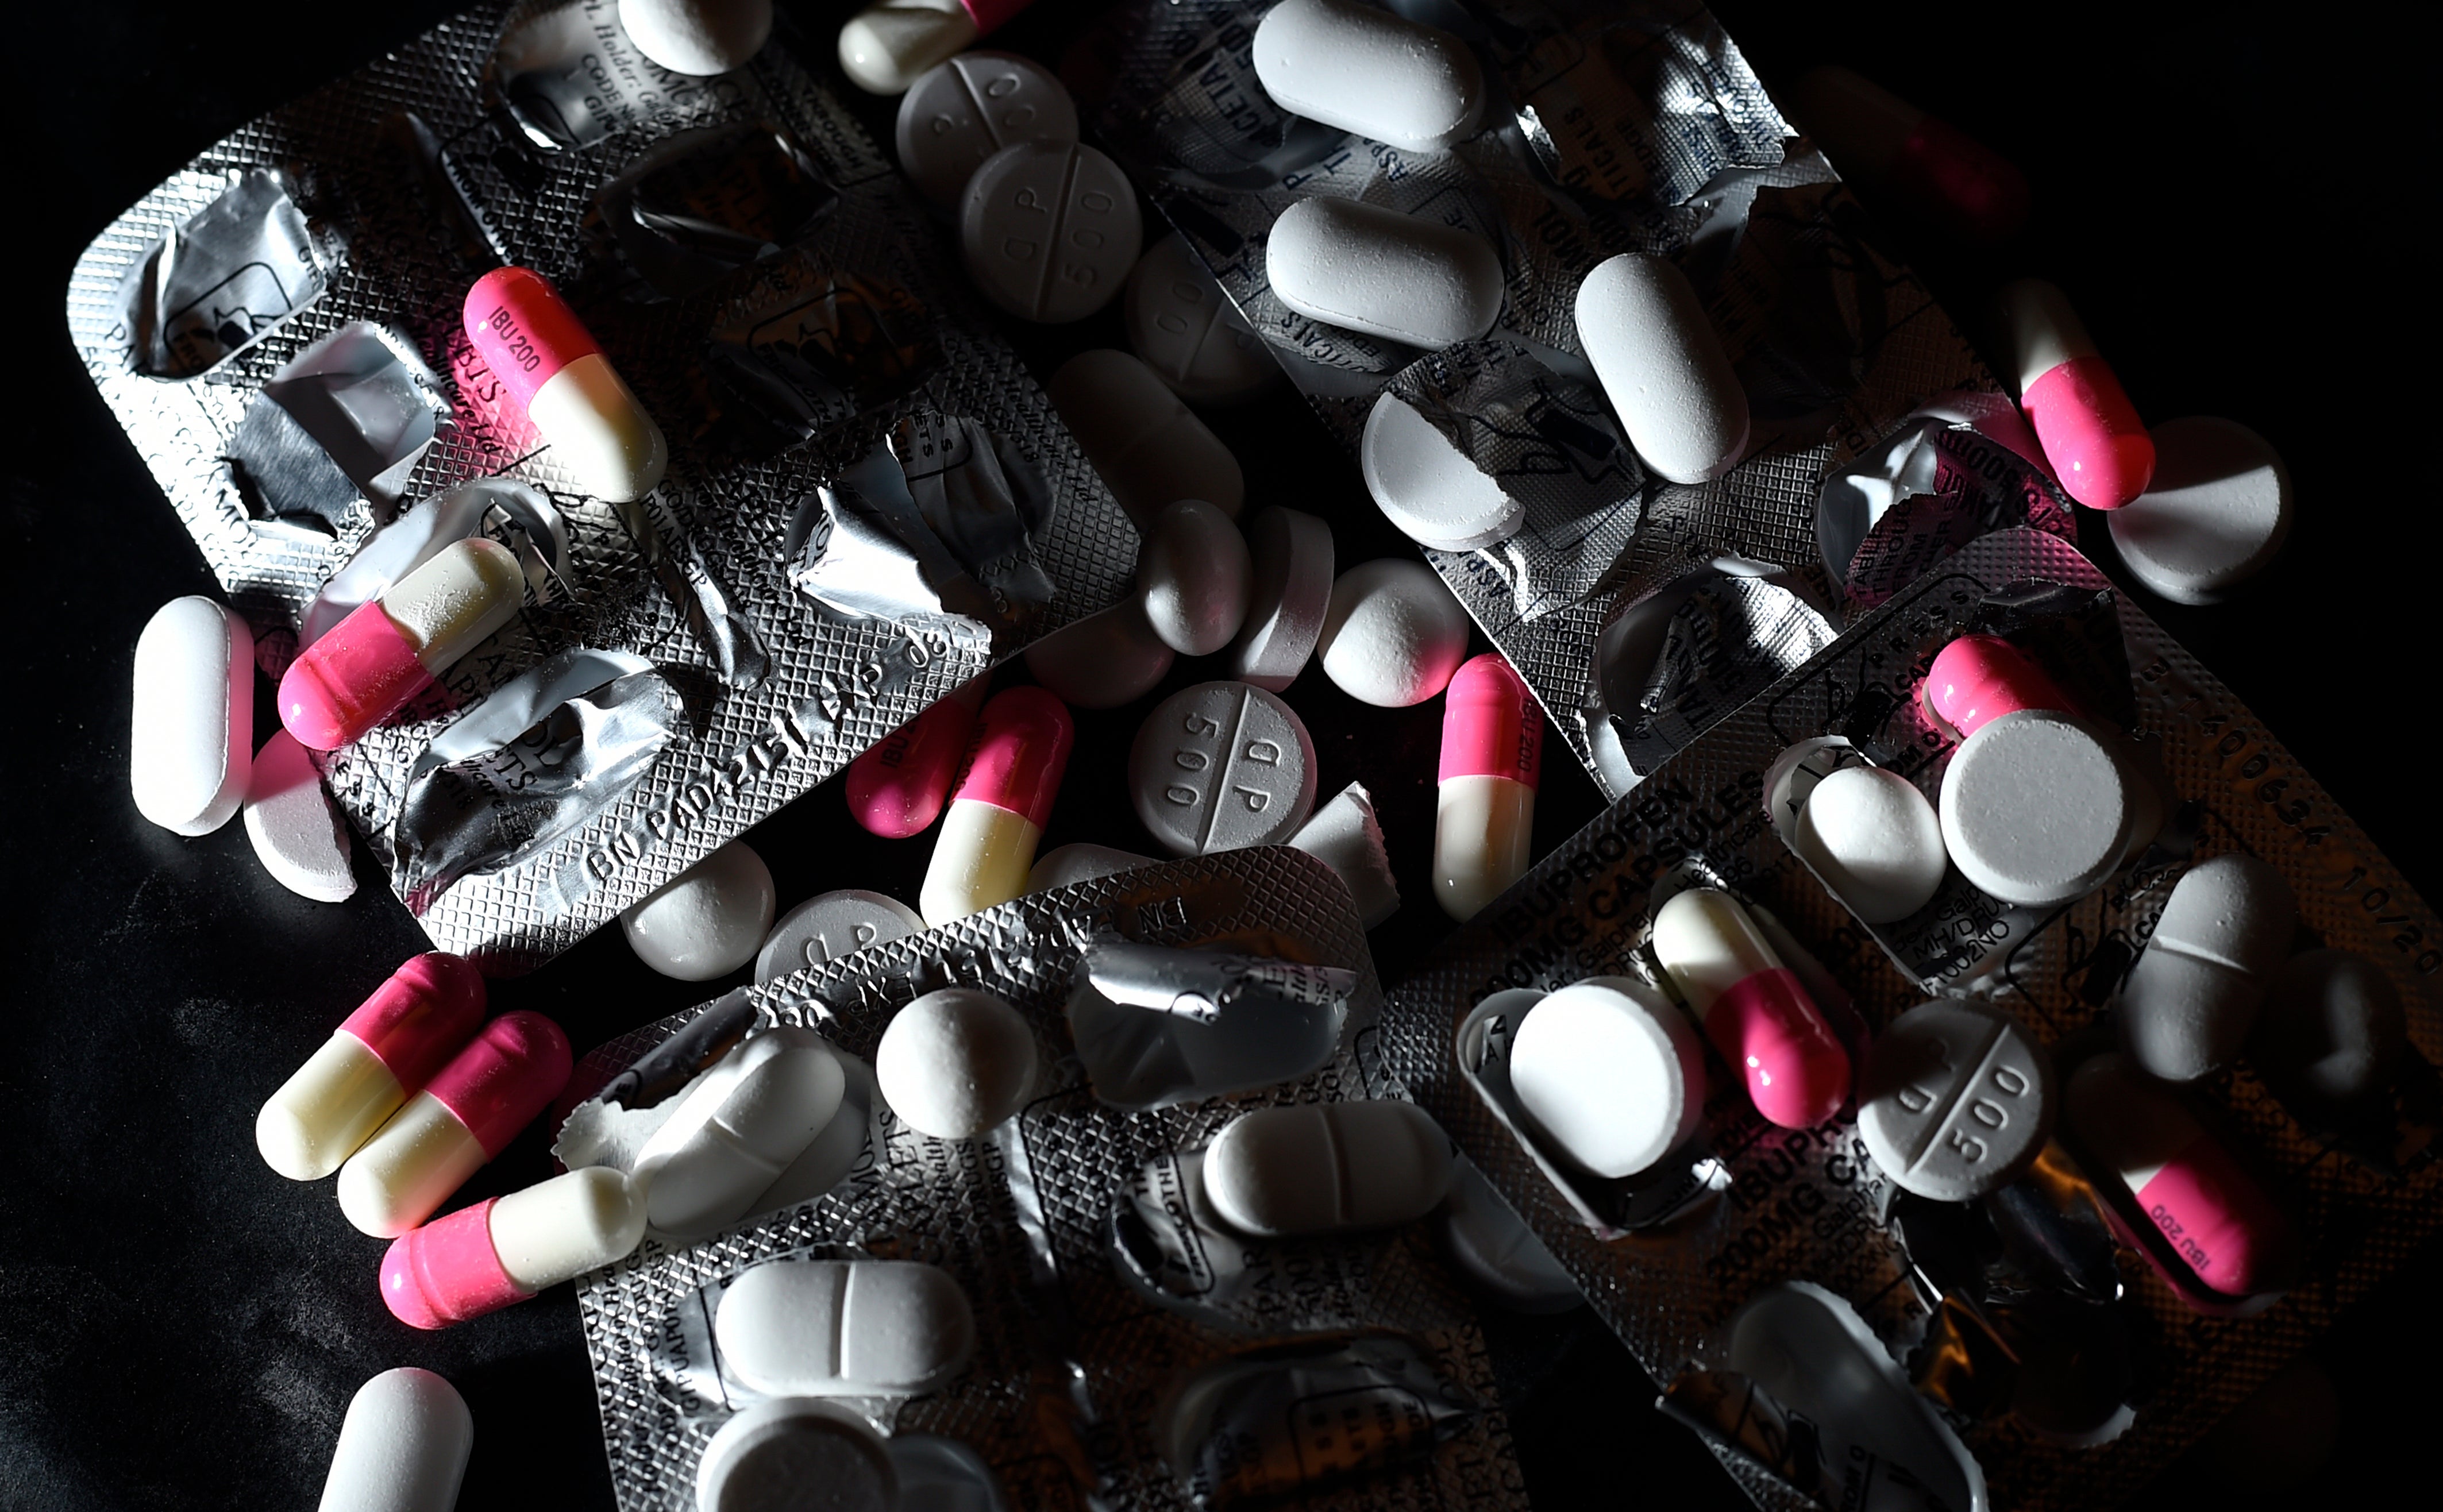 Stocks of paracetamol and ibuprofen are low, ONS data has revealed